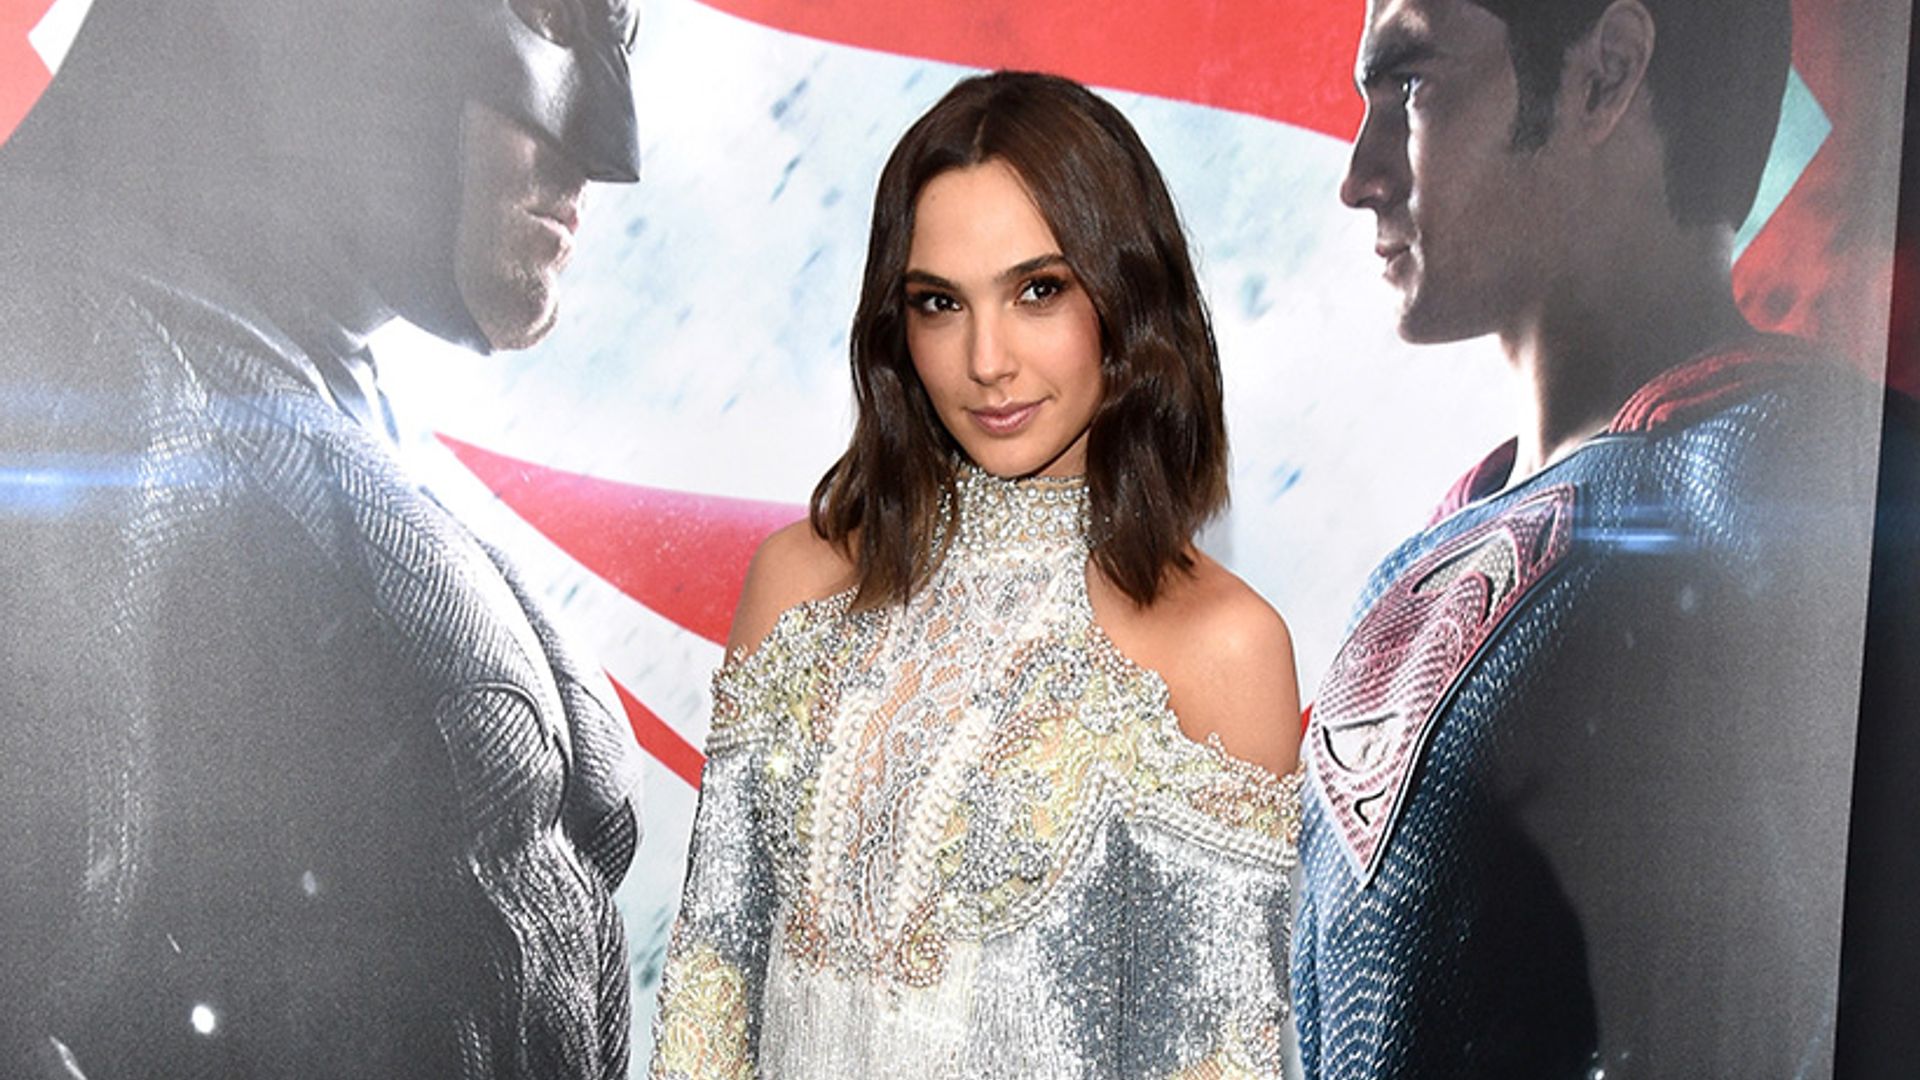 Wonder Woman Actress Gal Gadot Pregnant With Second Child